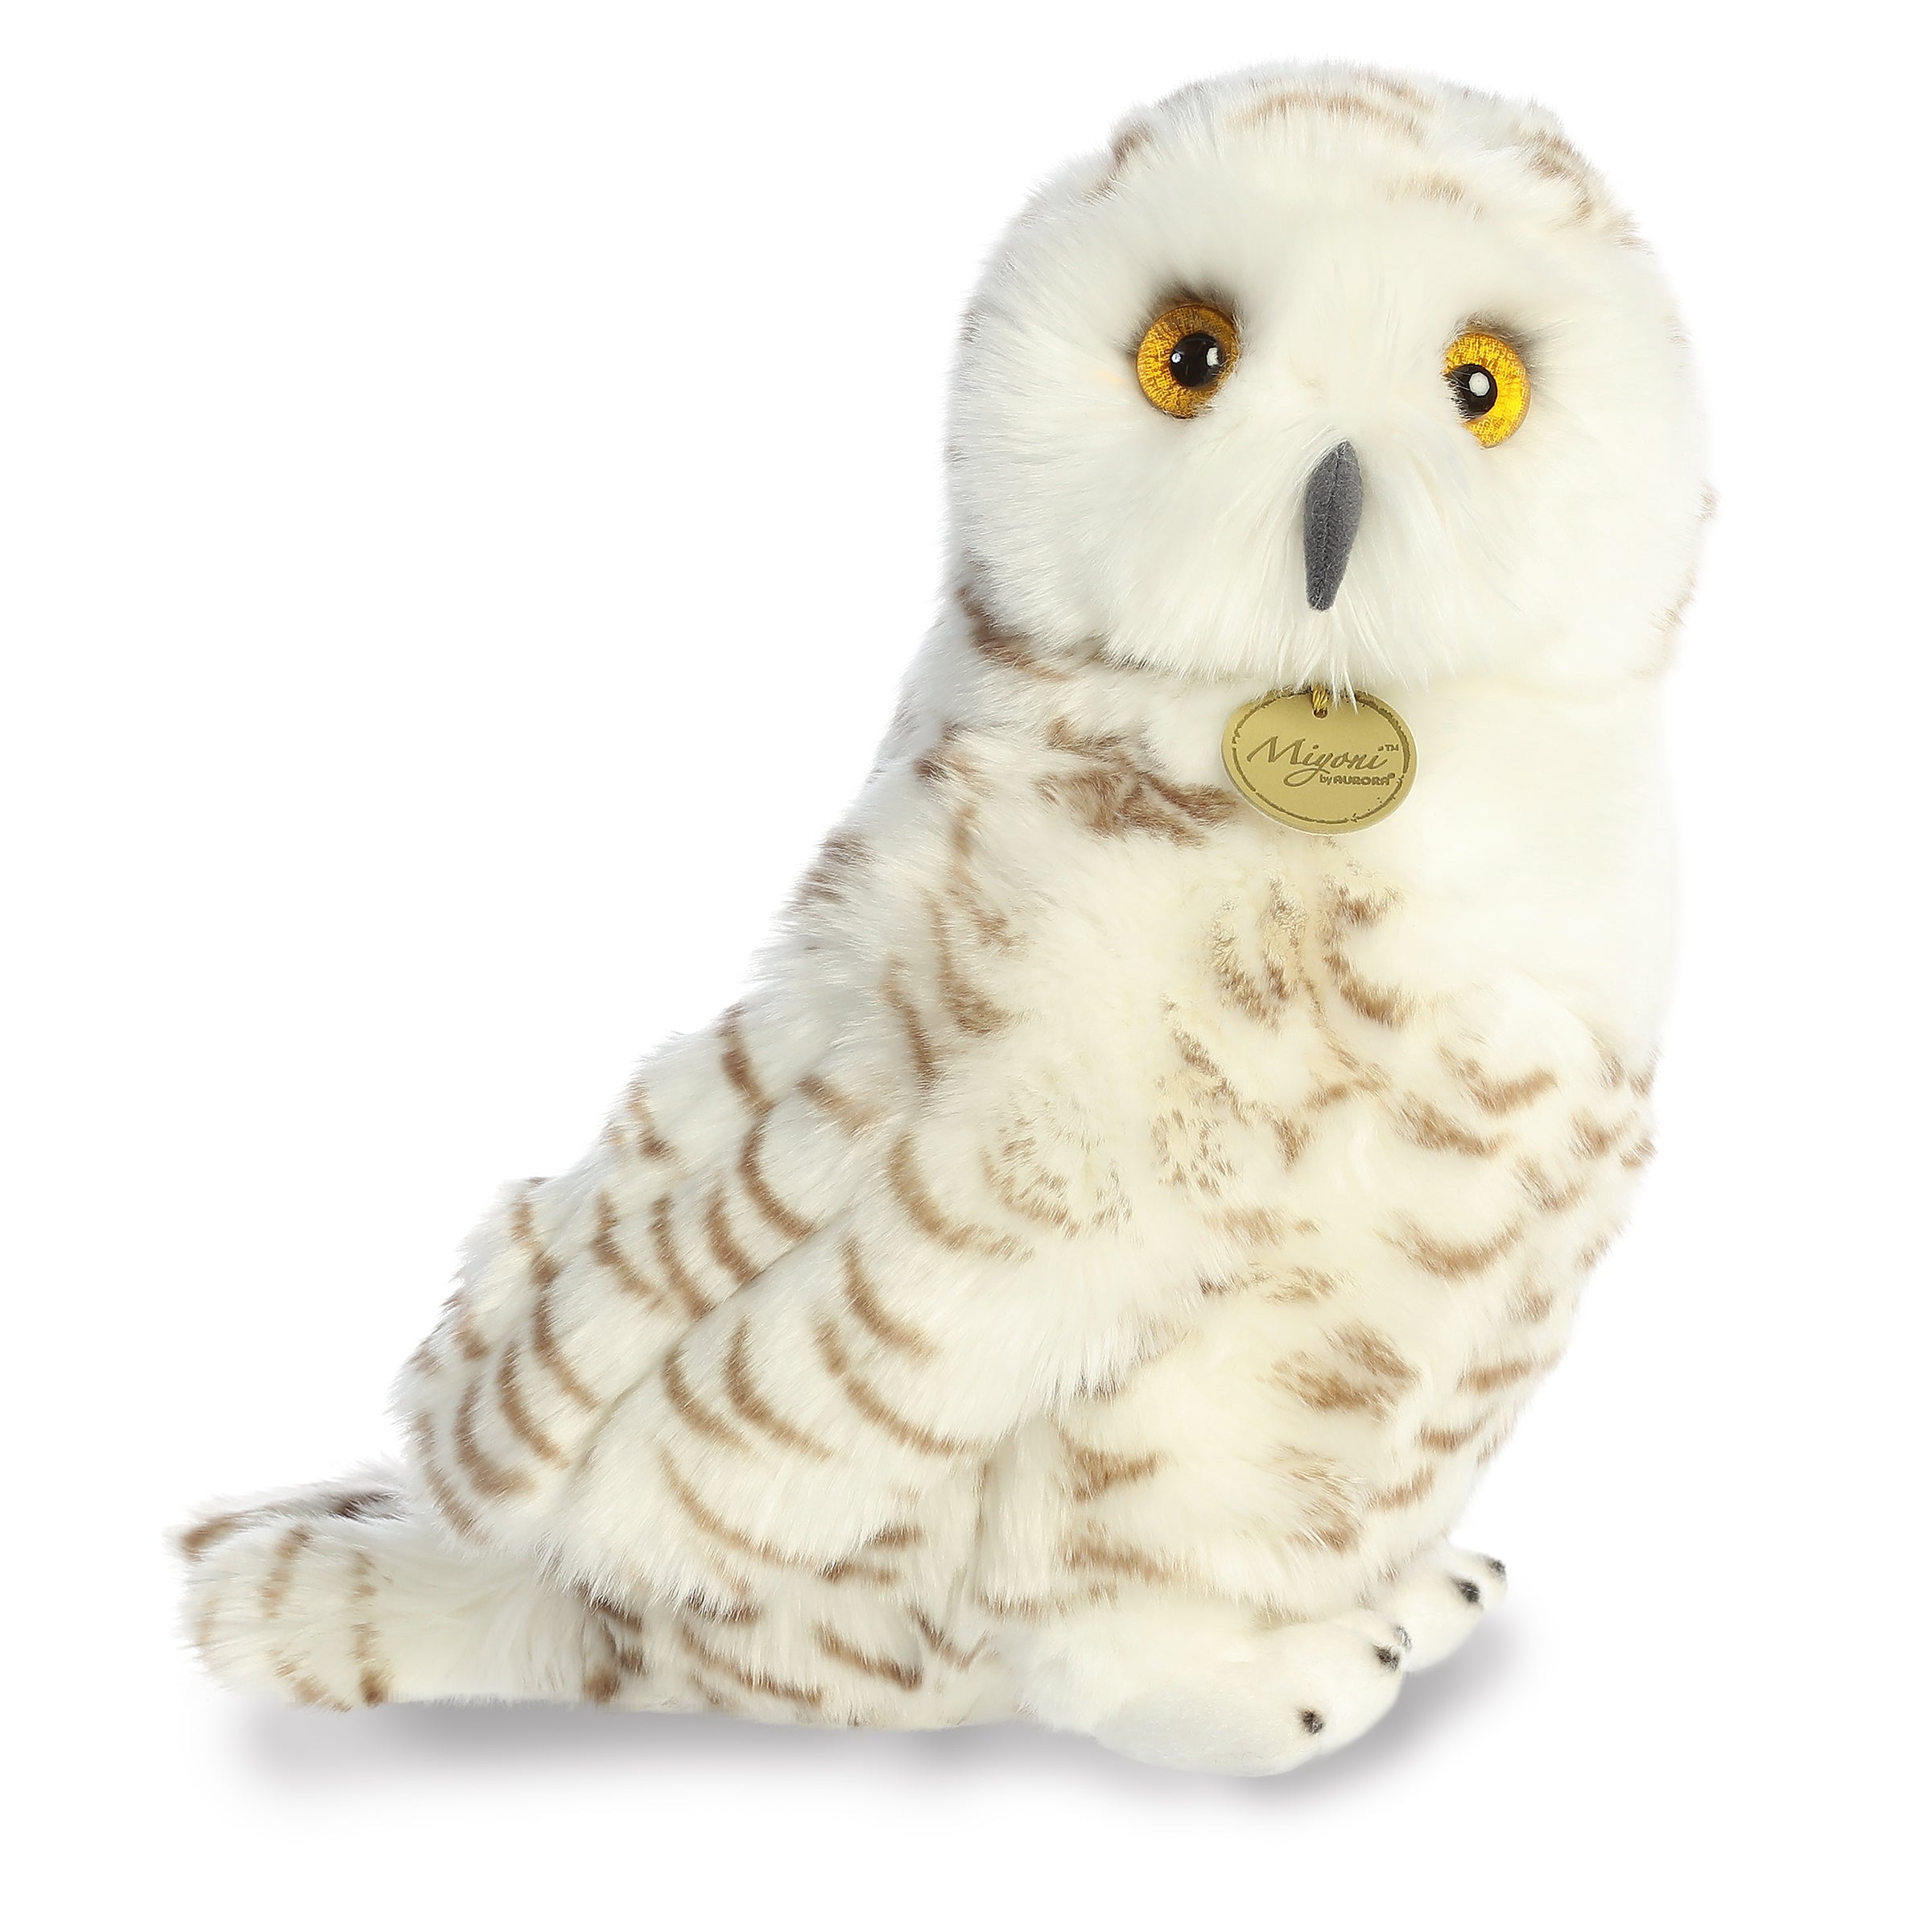 Snowy Owl plush with snowy-white body and detailed brown accents, soulful dark yellow eyes, and a miyoni hang tag on its neck